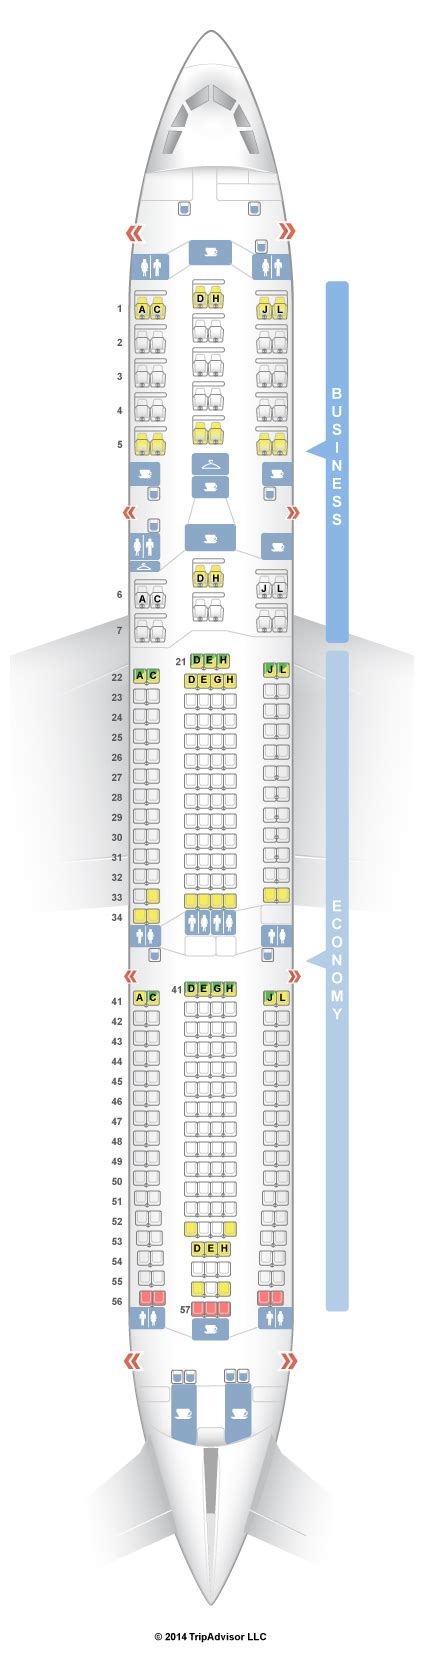 Seat Map Airbus A330 300 Finnair Best Seats In The Plane Images And